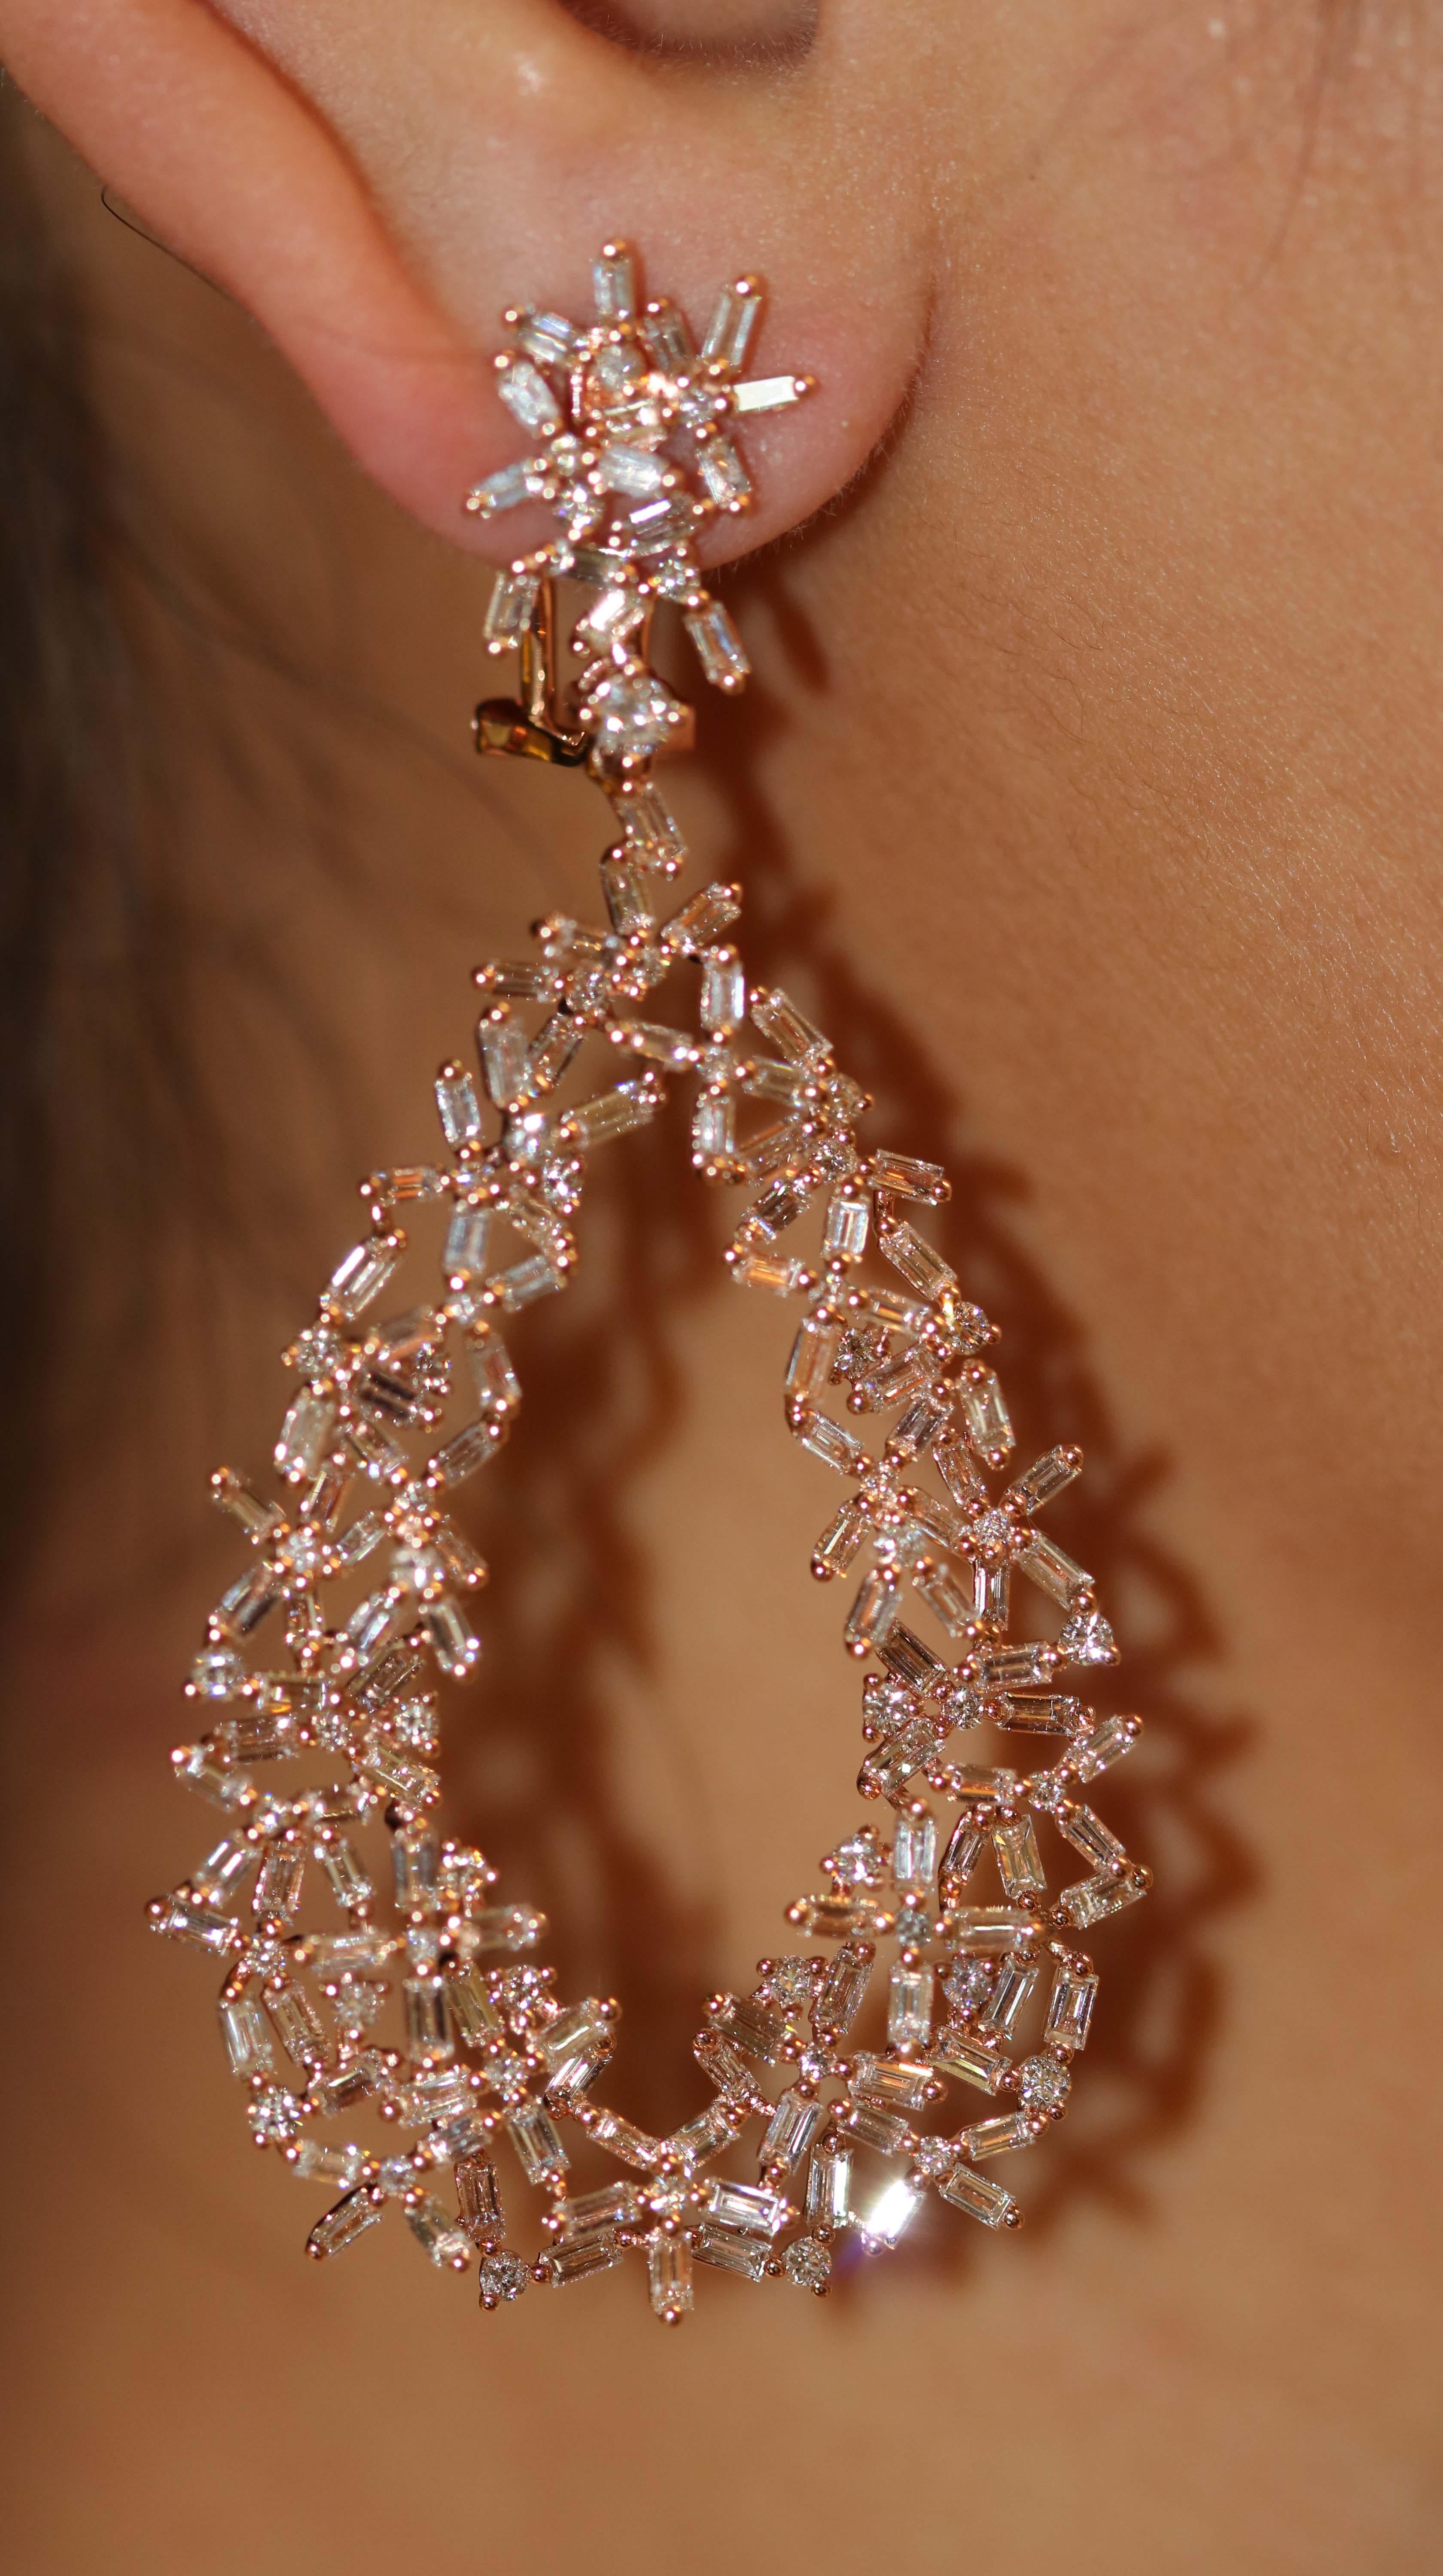 Unique and artistic earrings by Amwaj jewelry, made of baguette and round shape diamonds. This earrings are a nod to the penchant for modernist shapes and eclectic femininity. A playful addition to your accessory’s repertoire, this stunning earrings